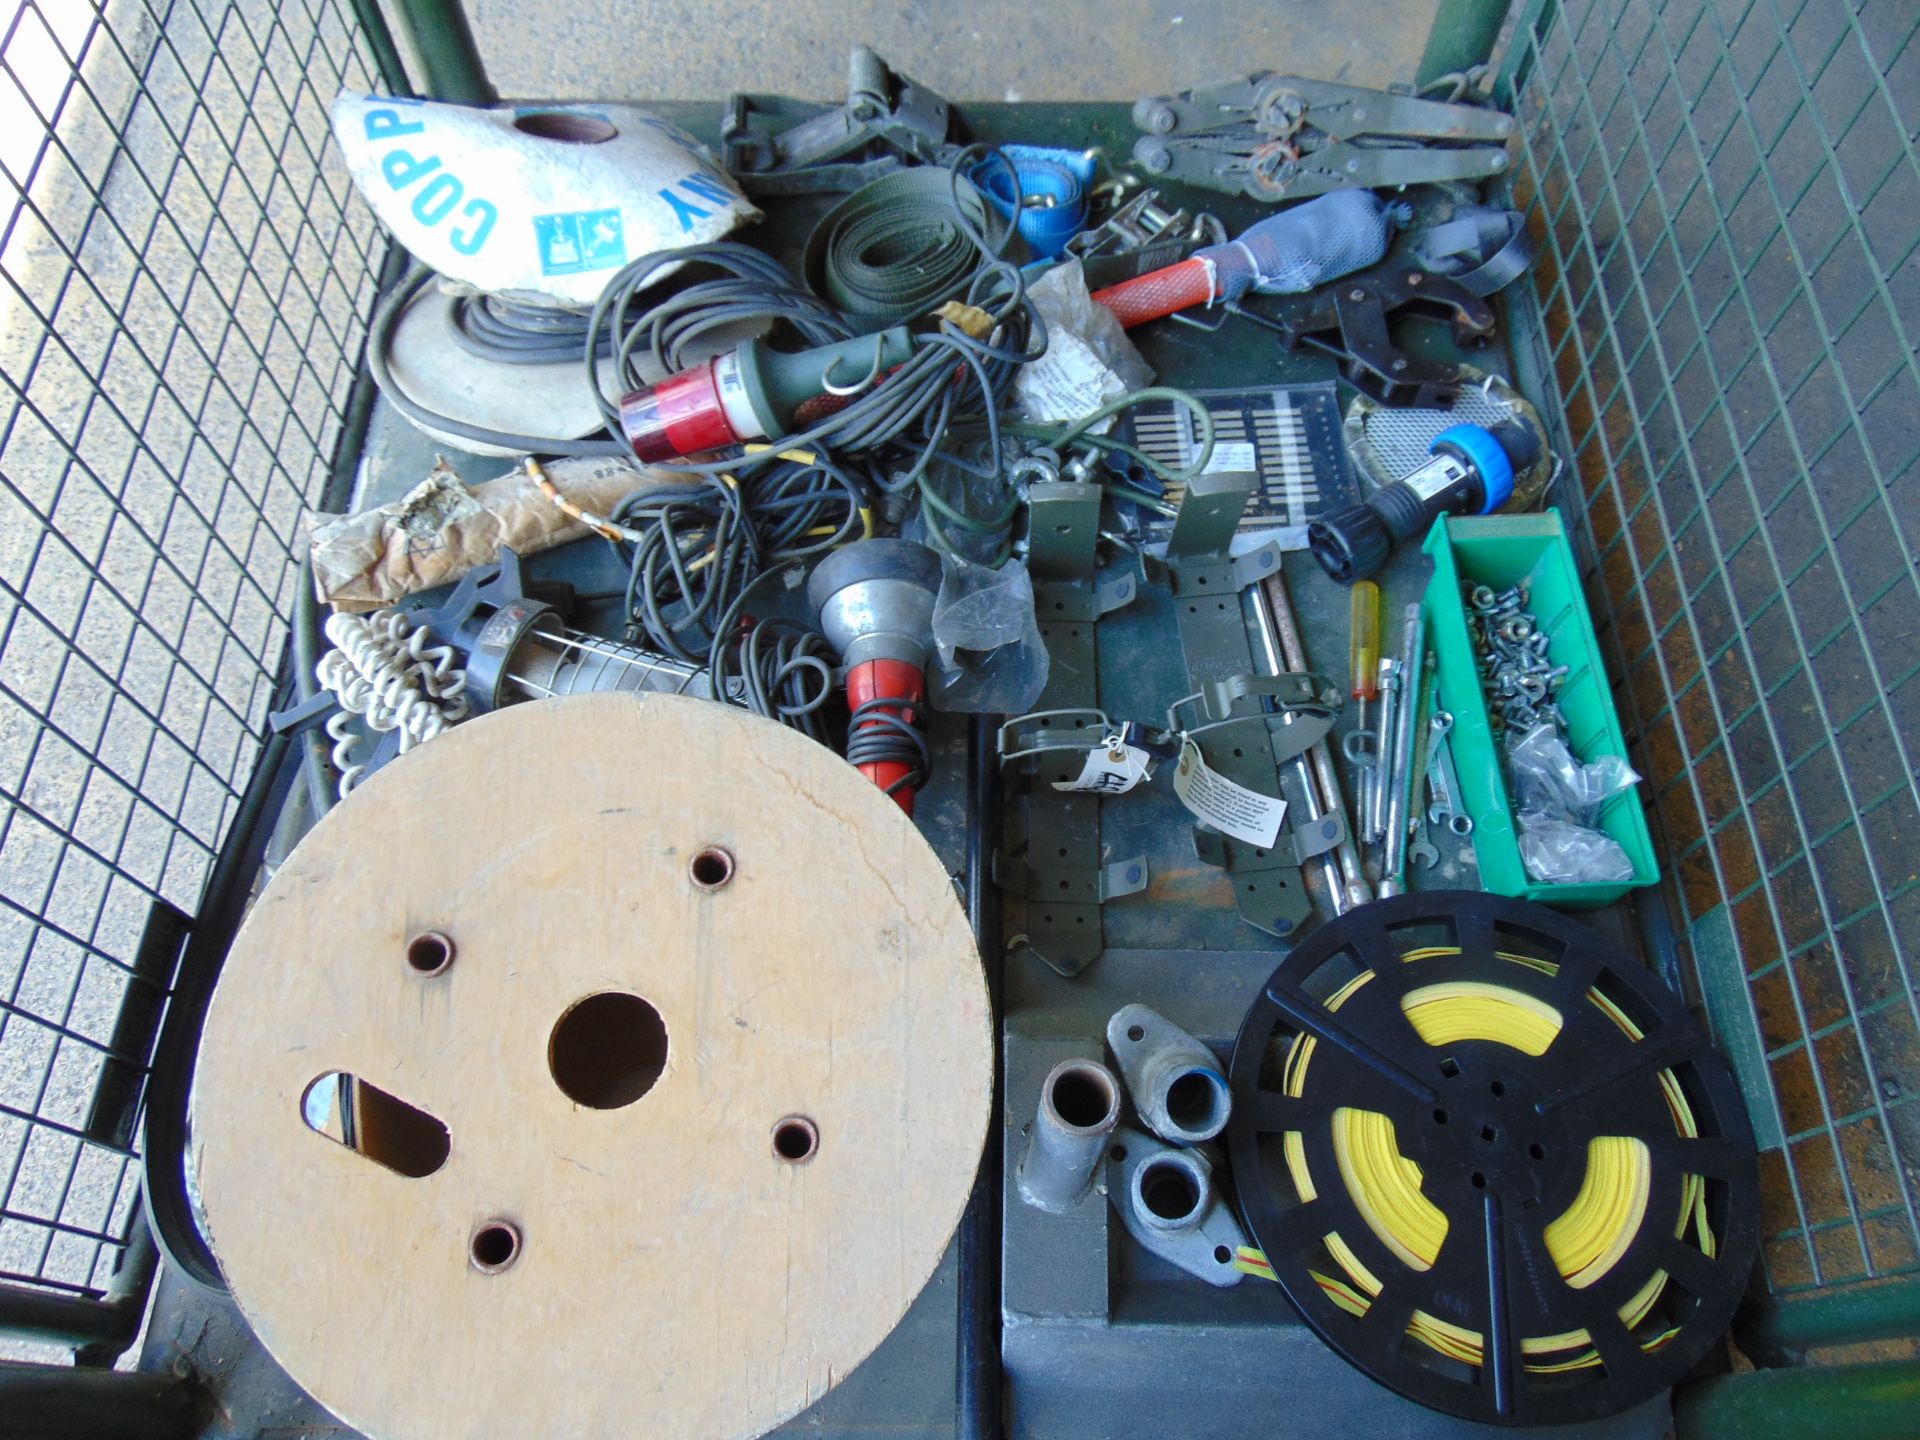 1 x Stillage Cable, Inspection Lamps, Ratchet Straps, Tools, Antenna Bases etc - Image 4 of 8